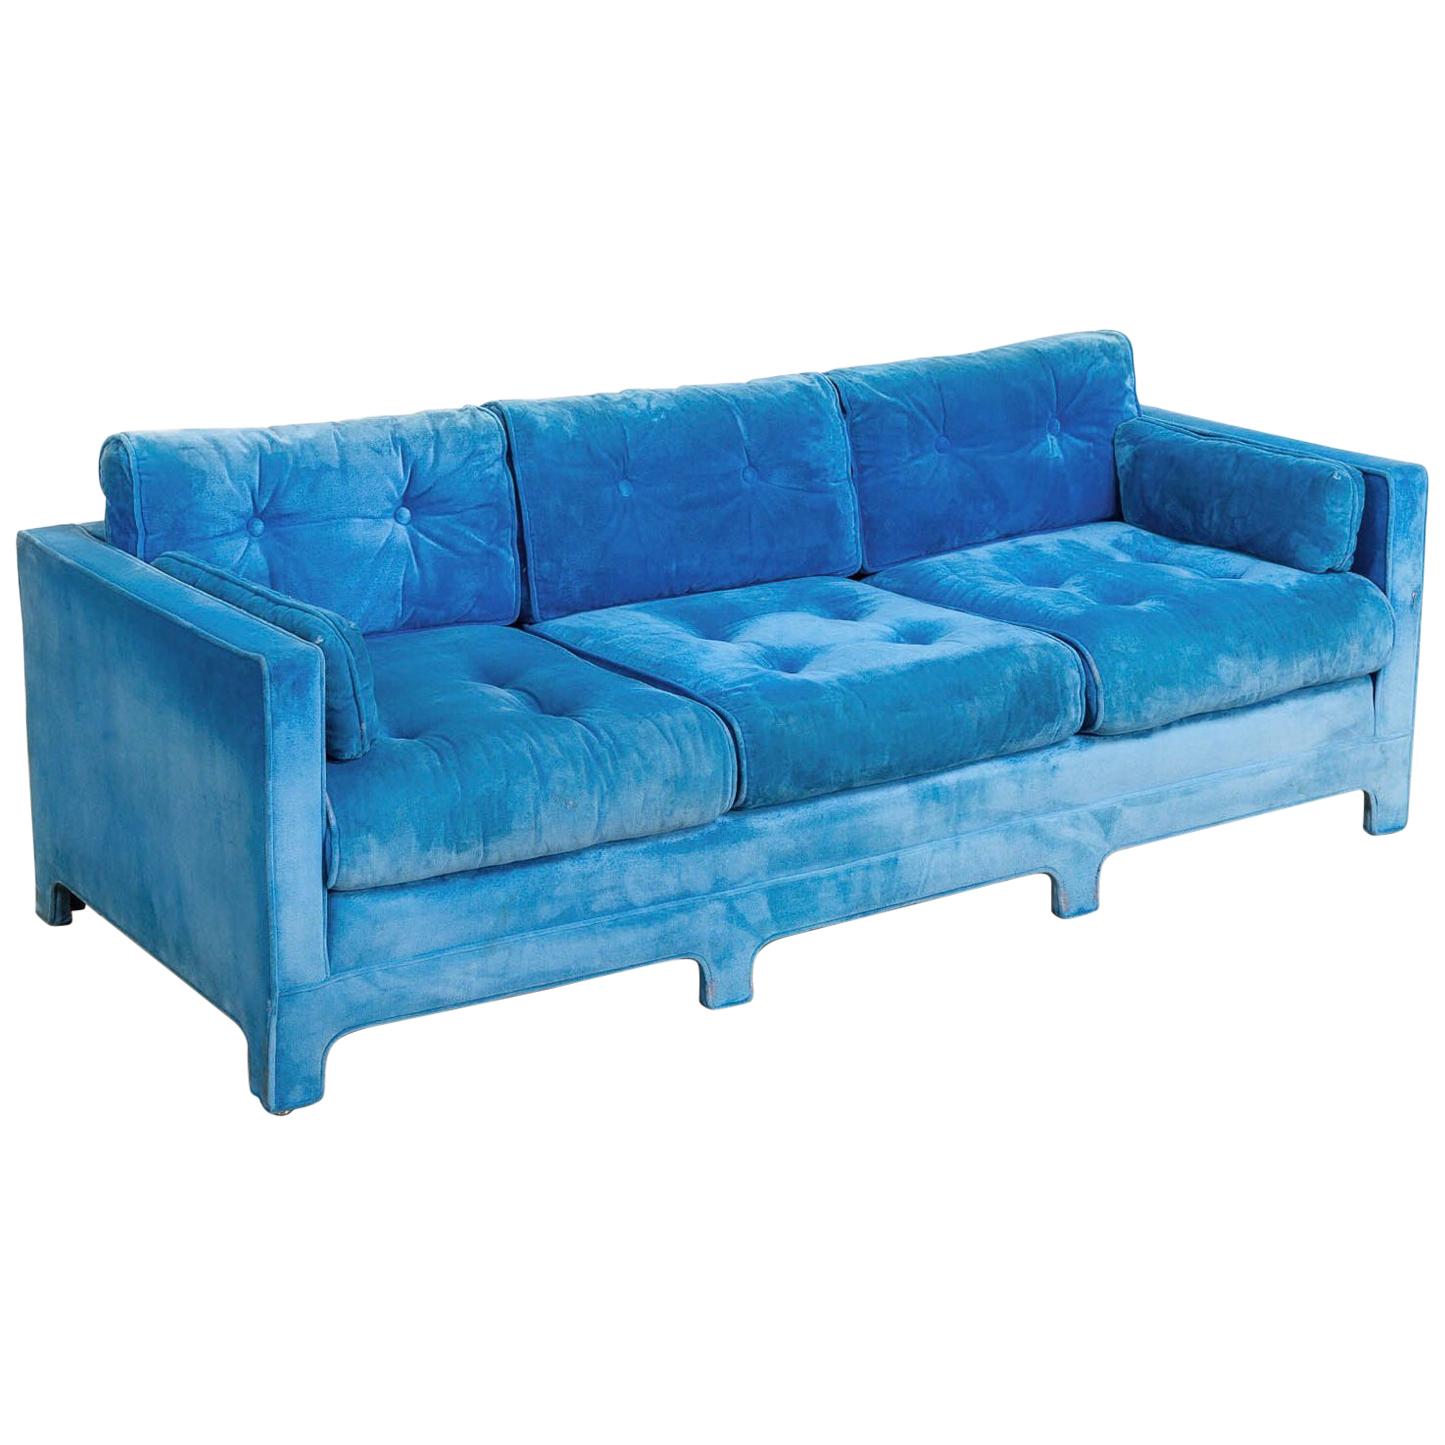 Midcentury Blue Velvet Upholstered Three-Seat Sofa Couch, 1970s For Sale